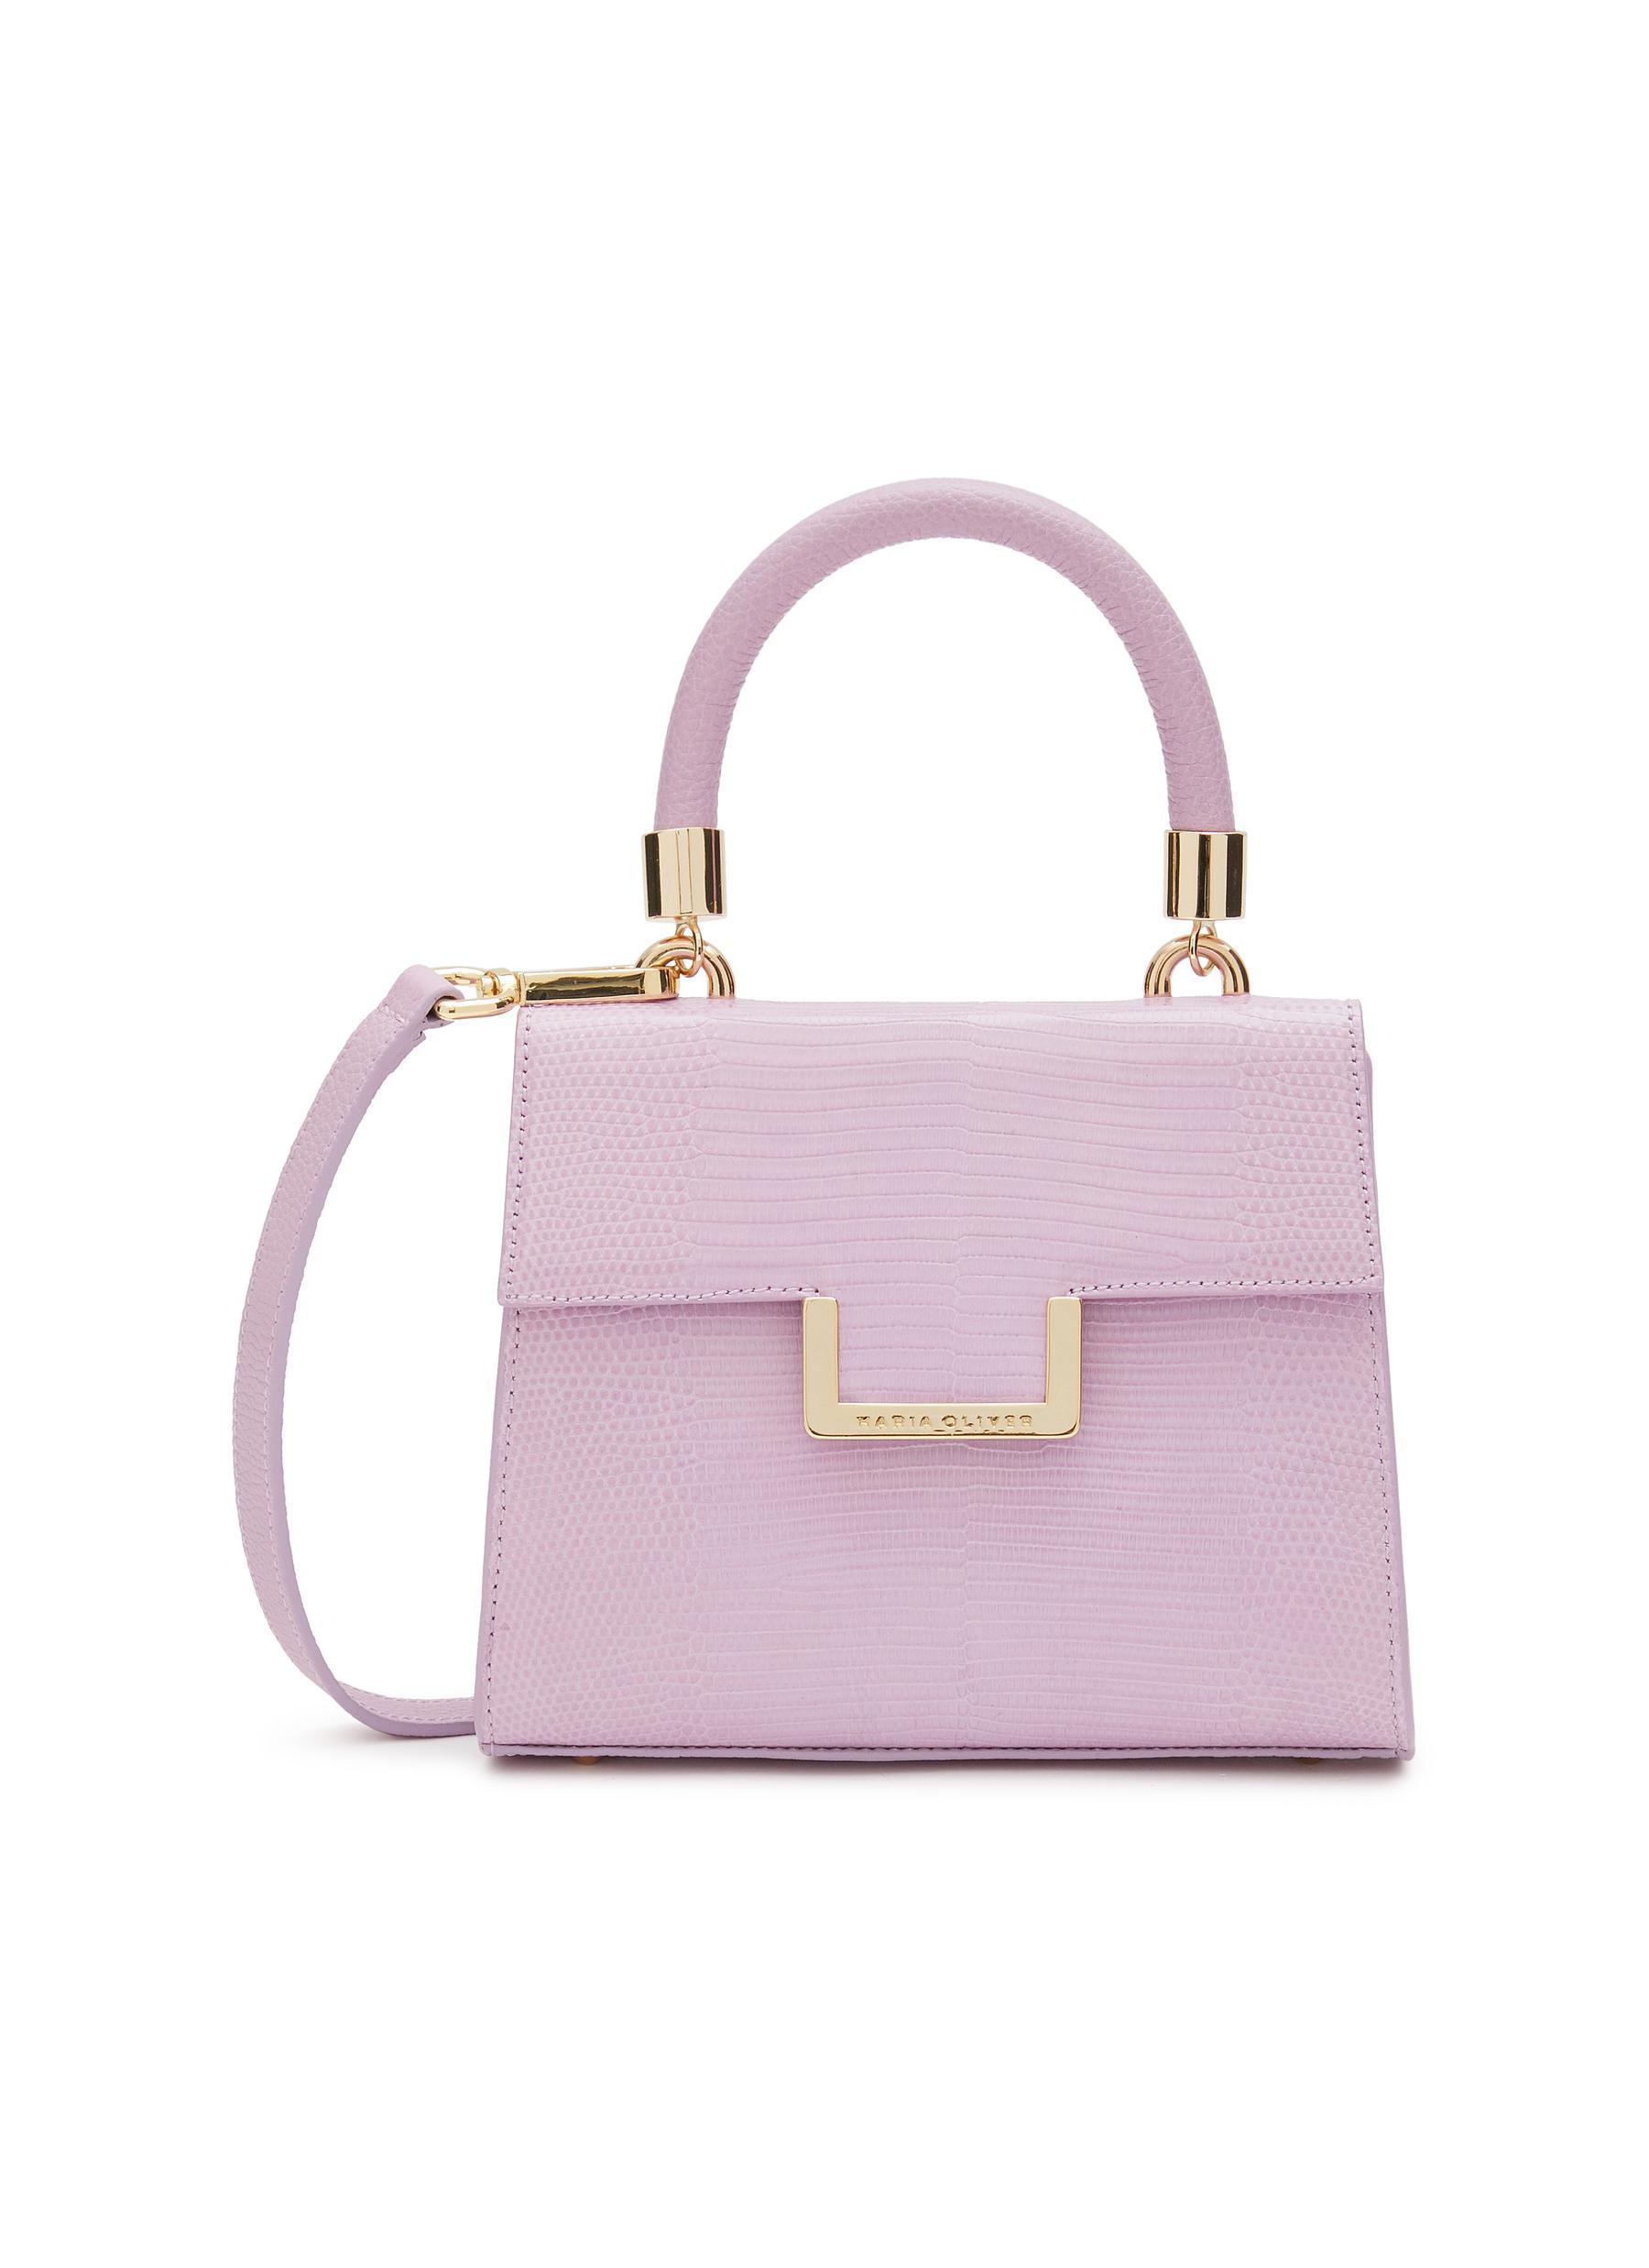 MARIA OLIVER 'michelle' Mini Top Handle Lizard Leather Bag in Pink | Lyst